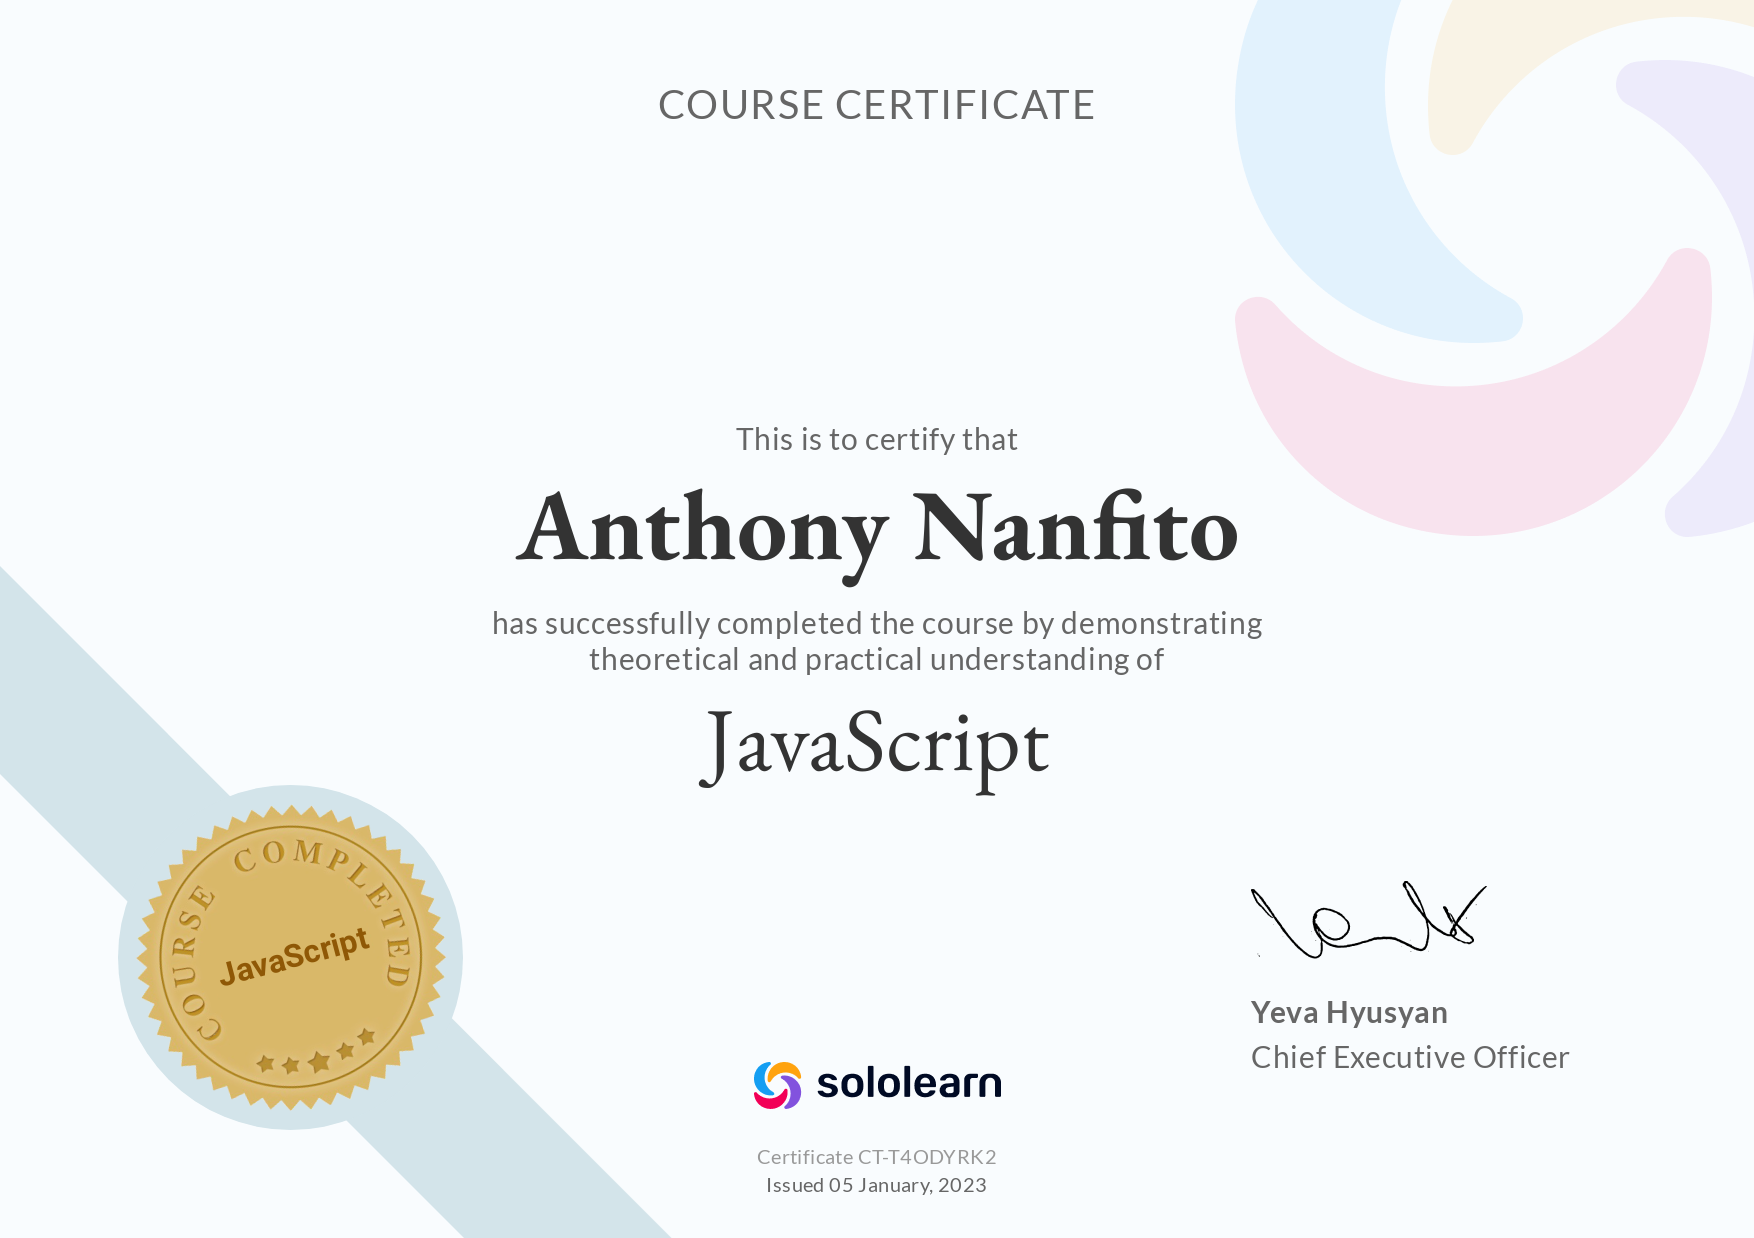 Sololearn course certificate for Theoretical and Practical JavaScript